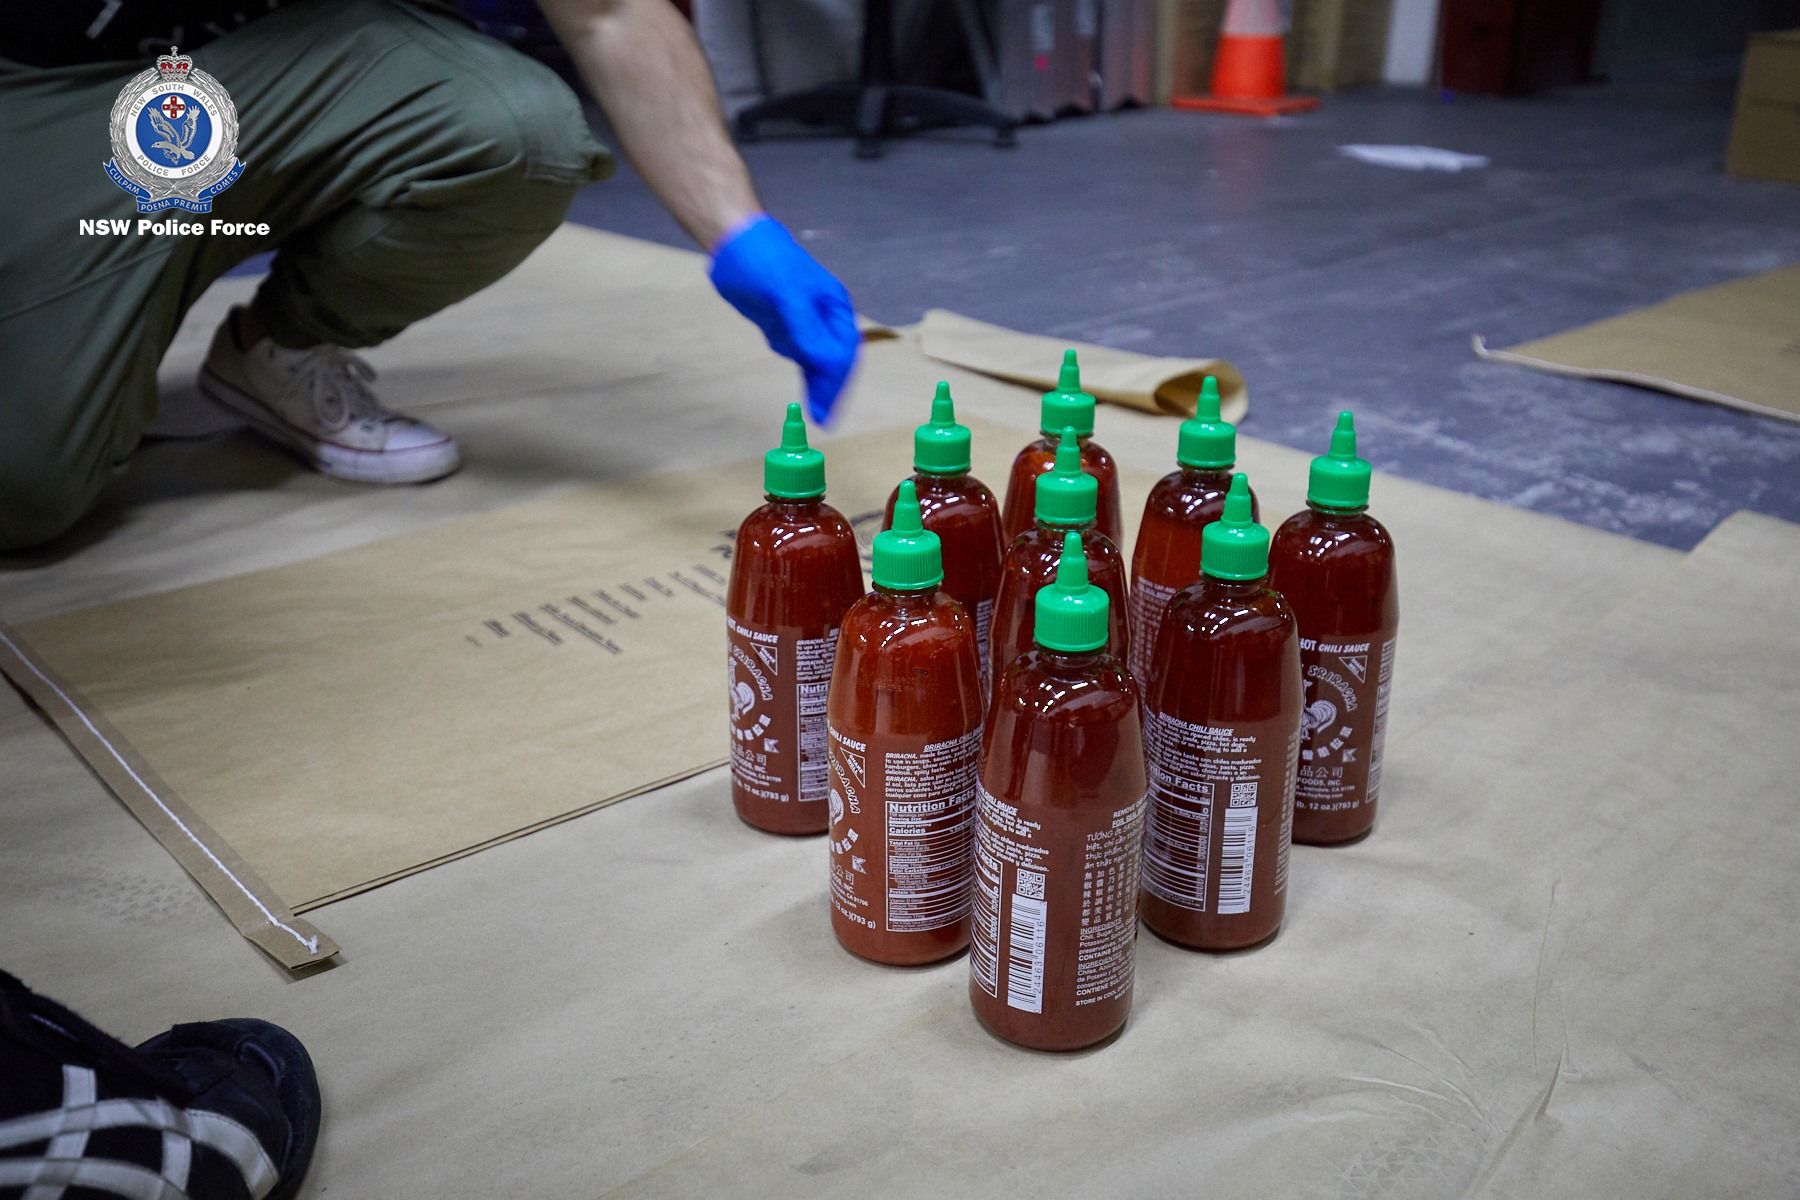 Australian police found hundreds of kilograms of drugs hidden in hot sauce bottles. (Credit: New South Wales Police Force)